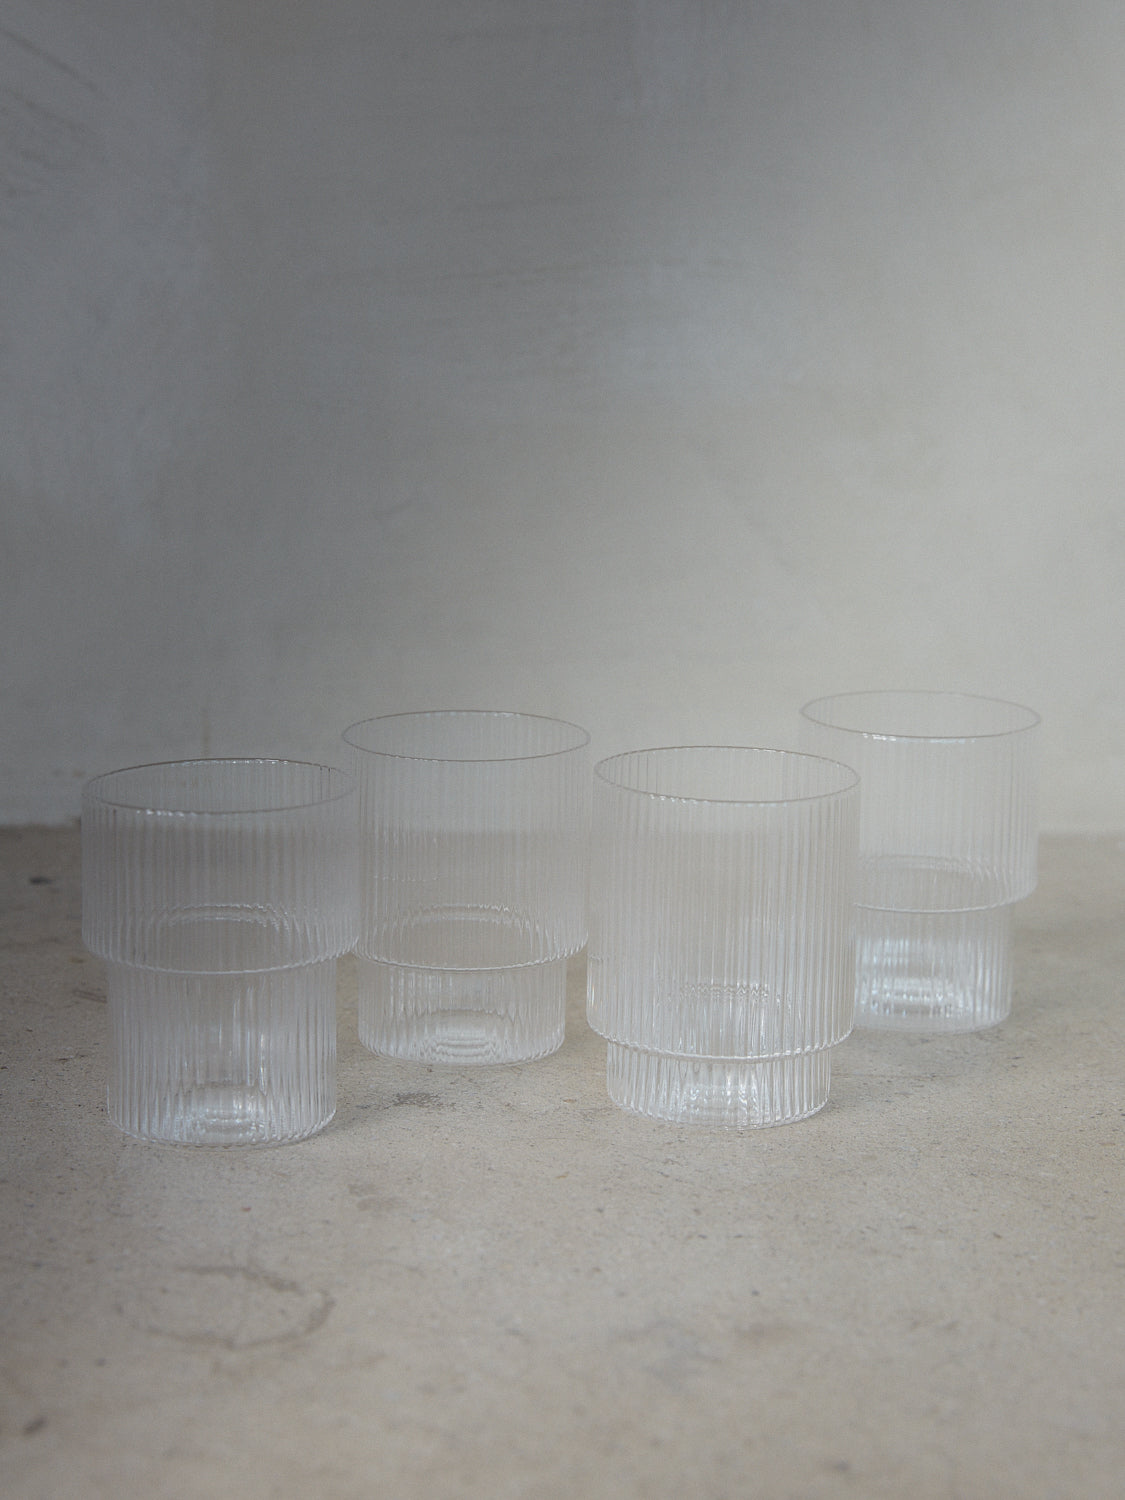 Ripple Glasses Set/4. A set of four unique drinking glasses with varied geometric forms and a sophisticated vertical ripple surface in clear transparent glass.